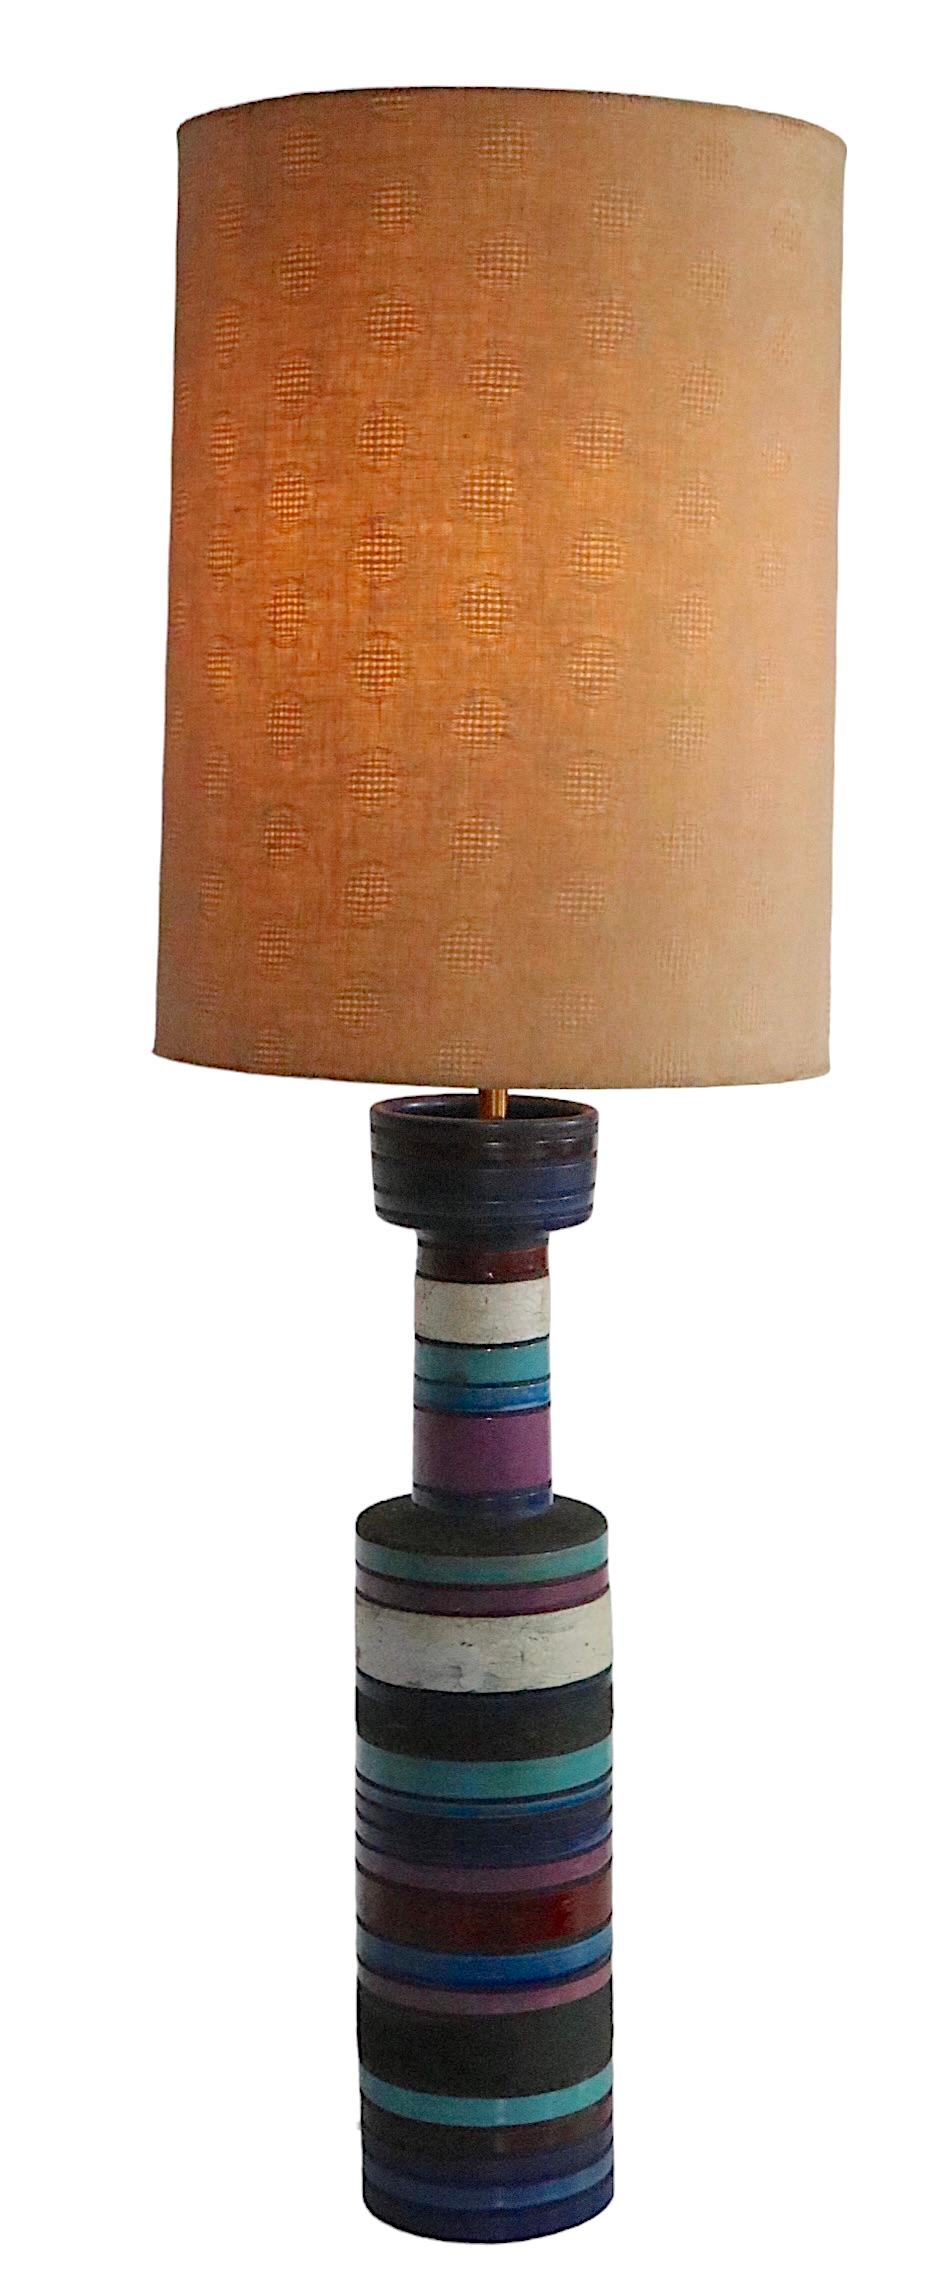 Rare Aldo Londi designed Cambogia table lamp made in Italy by Bitossi, imported by Raymor, circa 1950s. The ceramic body features poly chrome stripes with alternating high glaze and dark volcanic textured bands. The lamp is in very good, original,